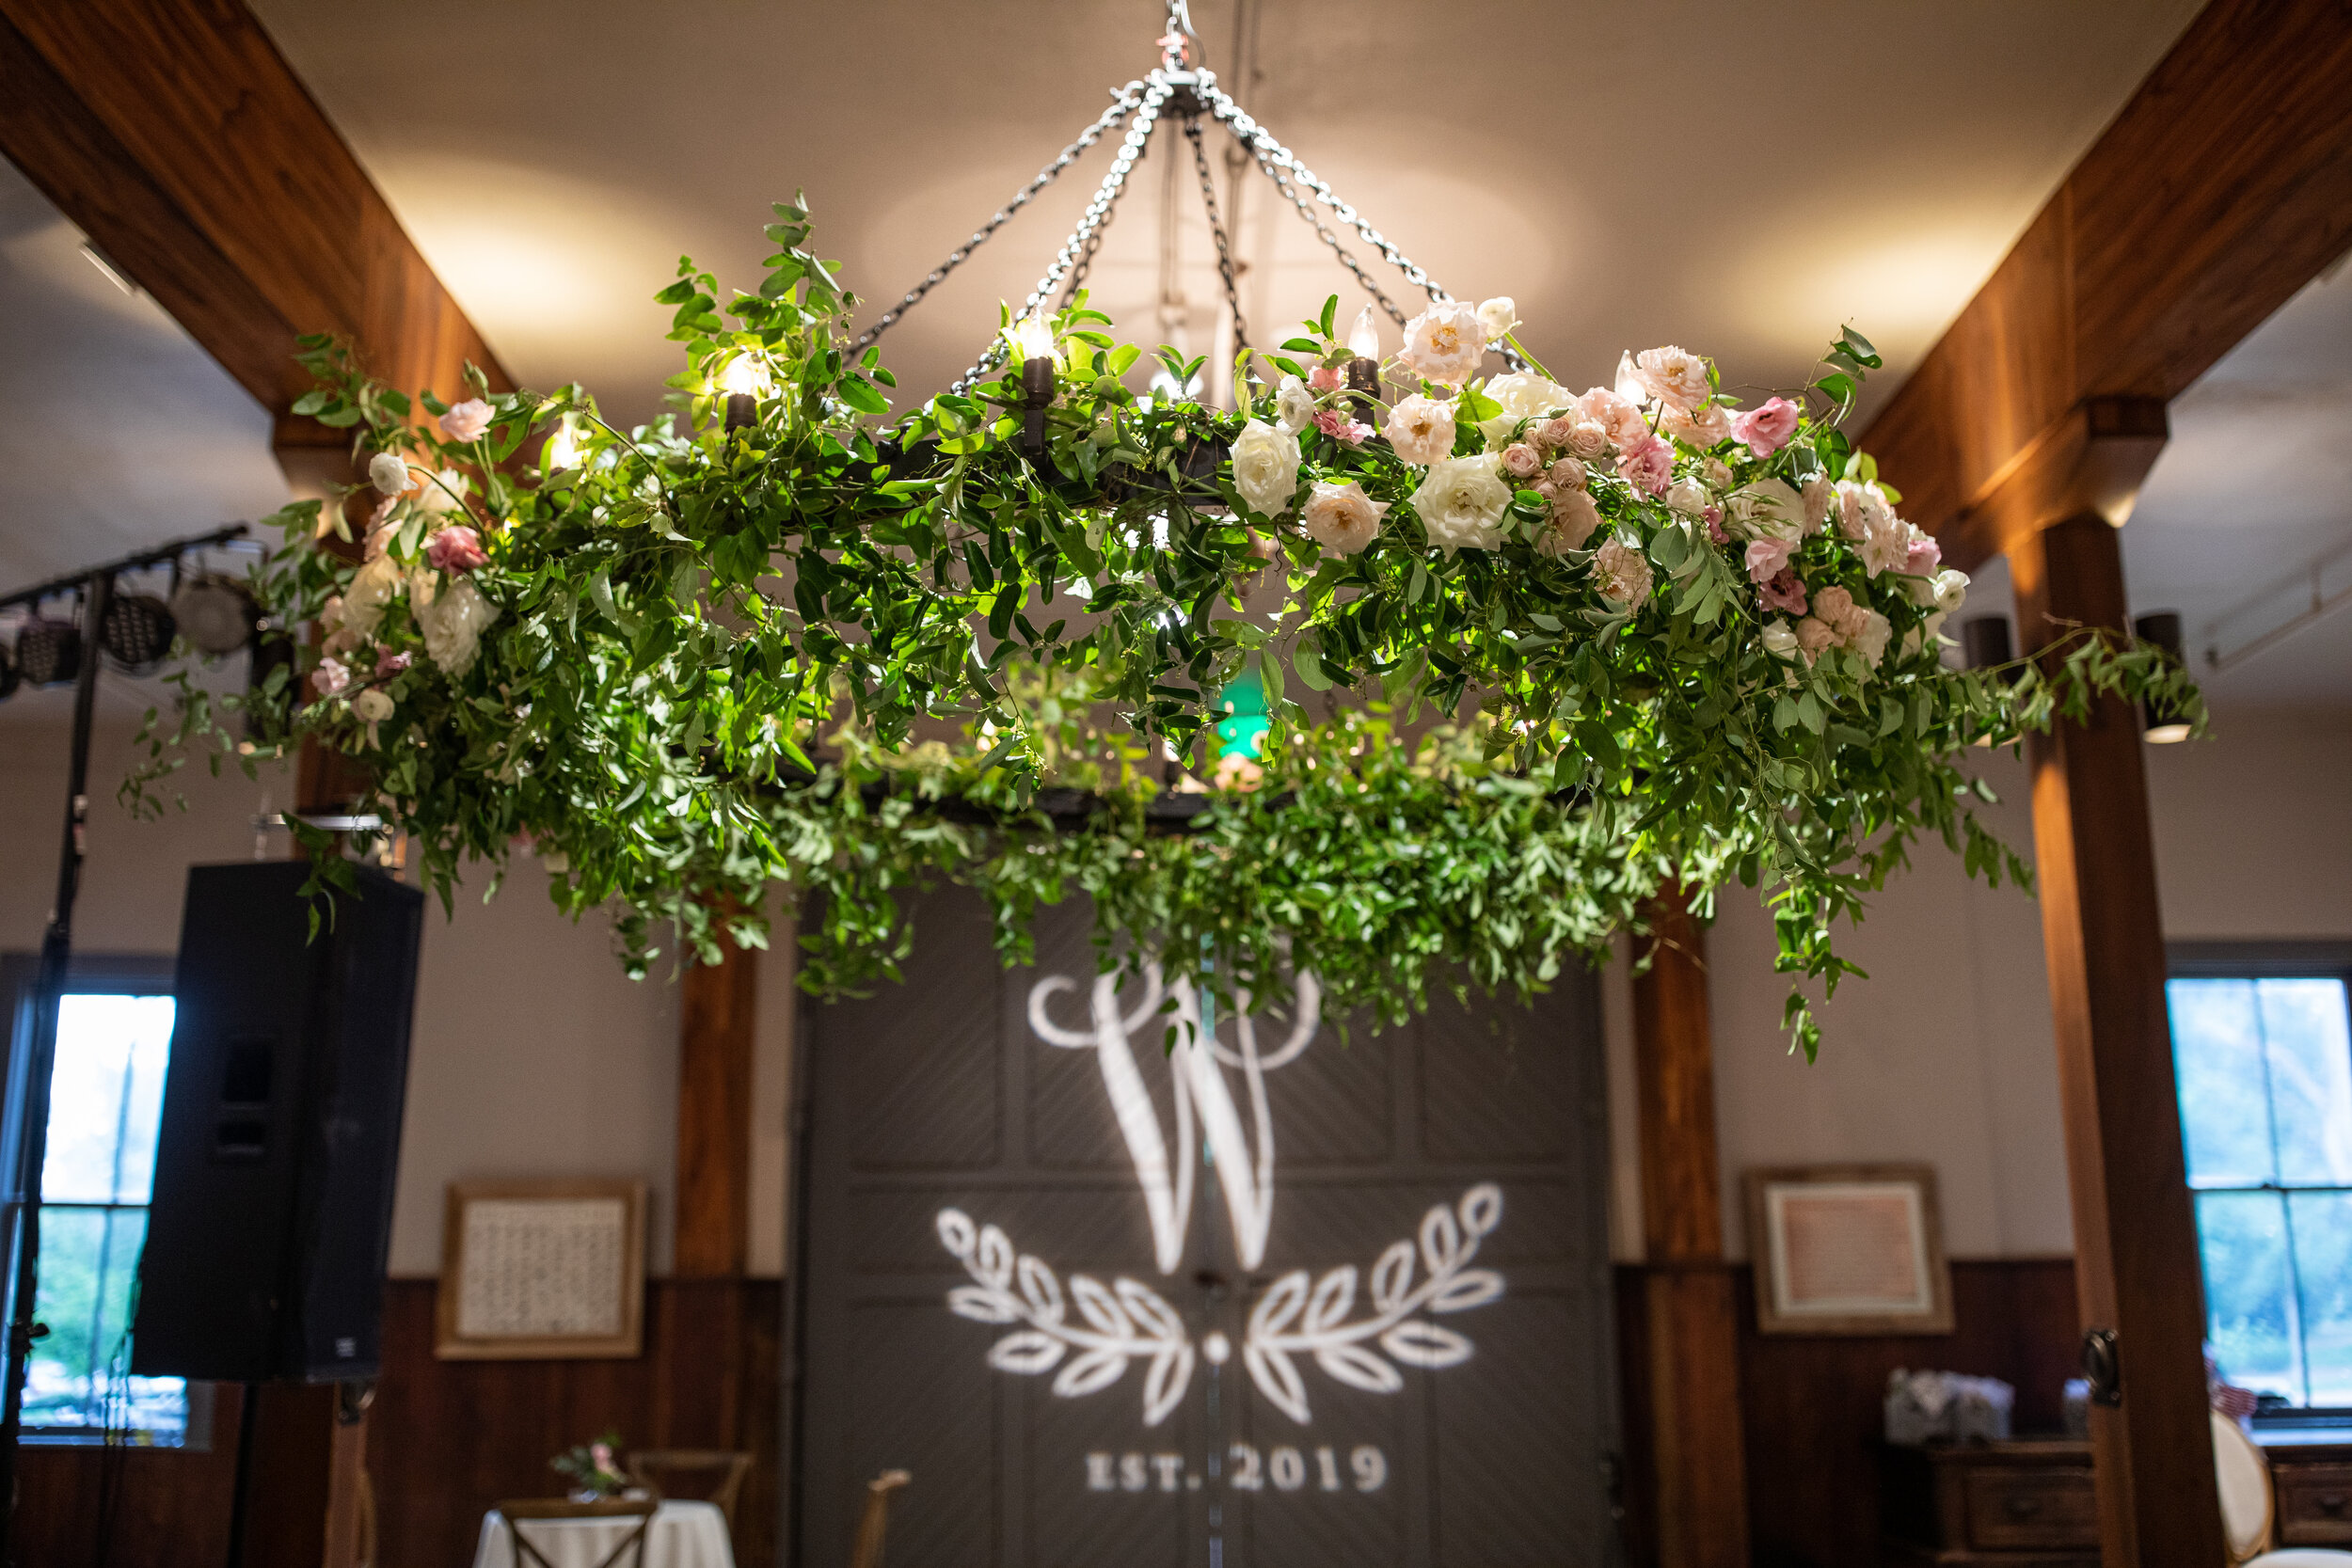 Oversized floral wreath installation over the dance floor with lush vines and greenery with blush and white flowers. Nashville event and wedding florist at Belle Meade Plantation.